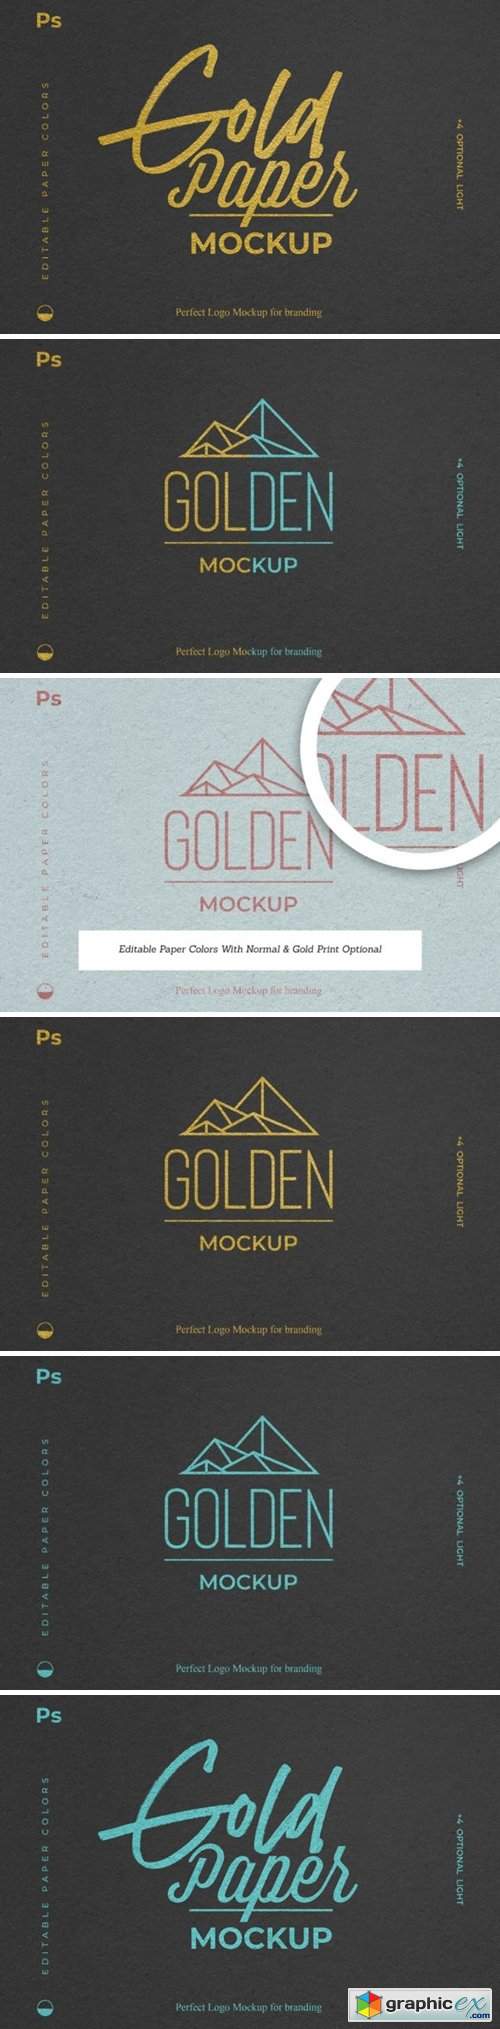 Gold Foil Paper Logo Mockup Free Download Vector Stock Image Photoshop Icon